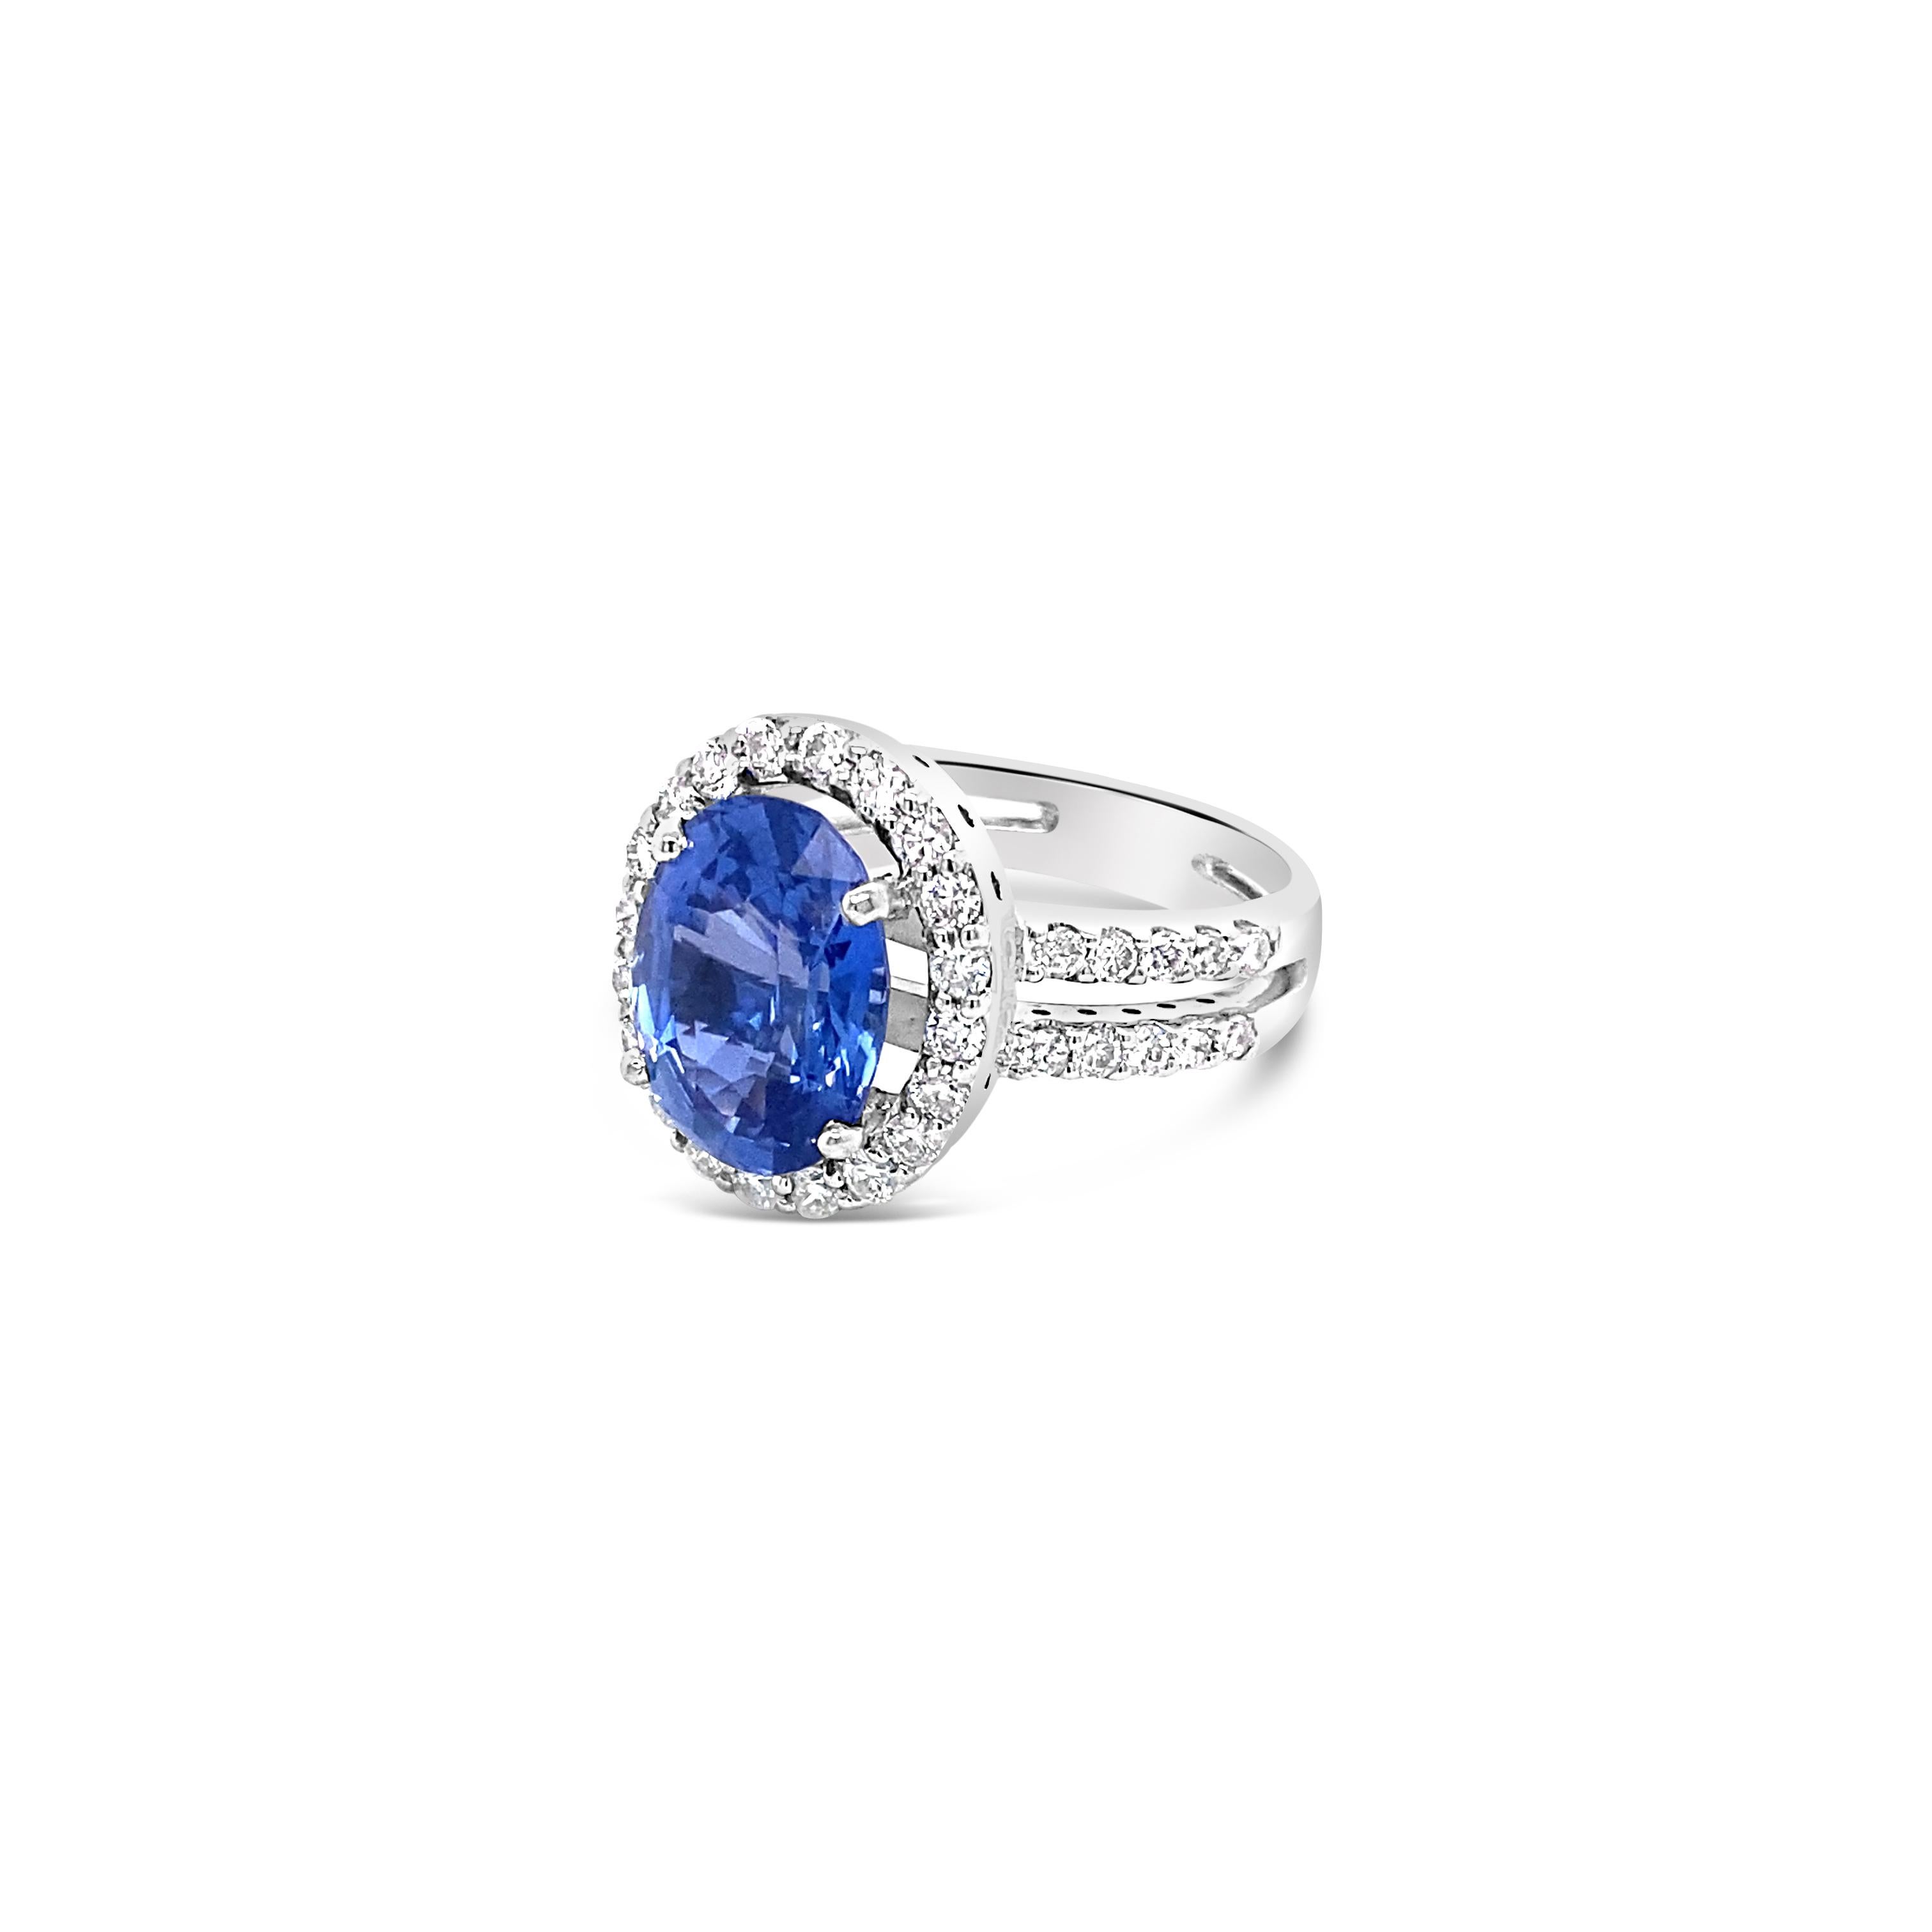 This ring features a stunning 4.61 carat oval cut natural Burma sapphire with no heat. The ring is set in 18 karat white gold accented by 0.73 carat total weight in round diamonds in a halo and along the double shank. This is a very rare sapphire